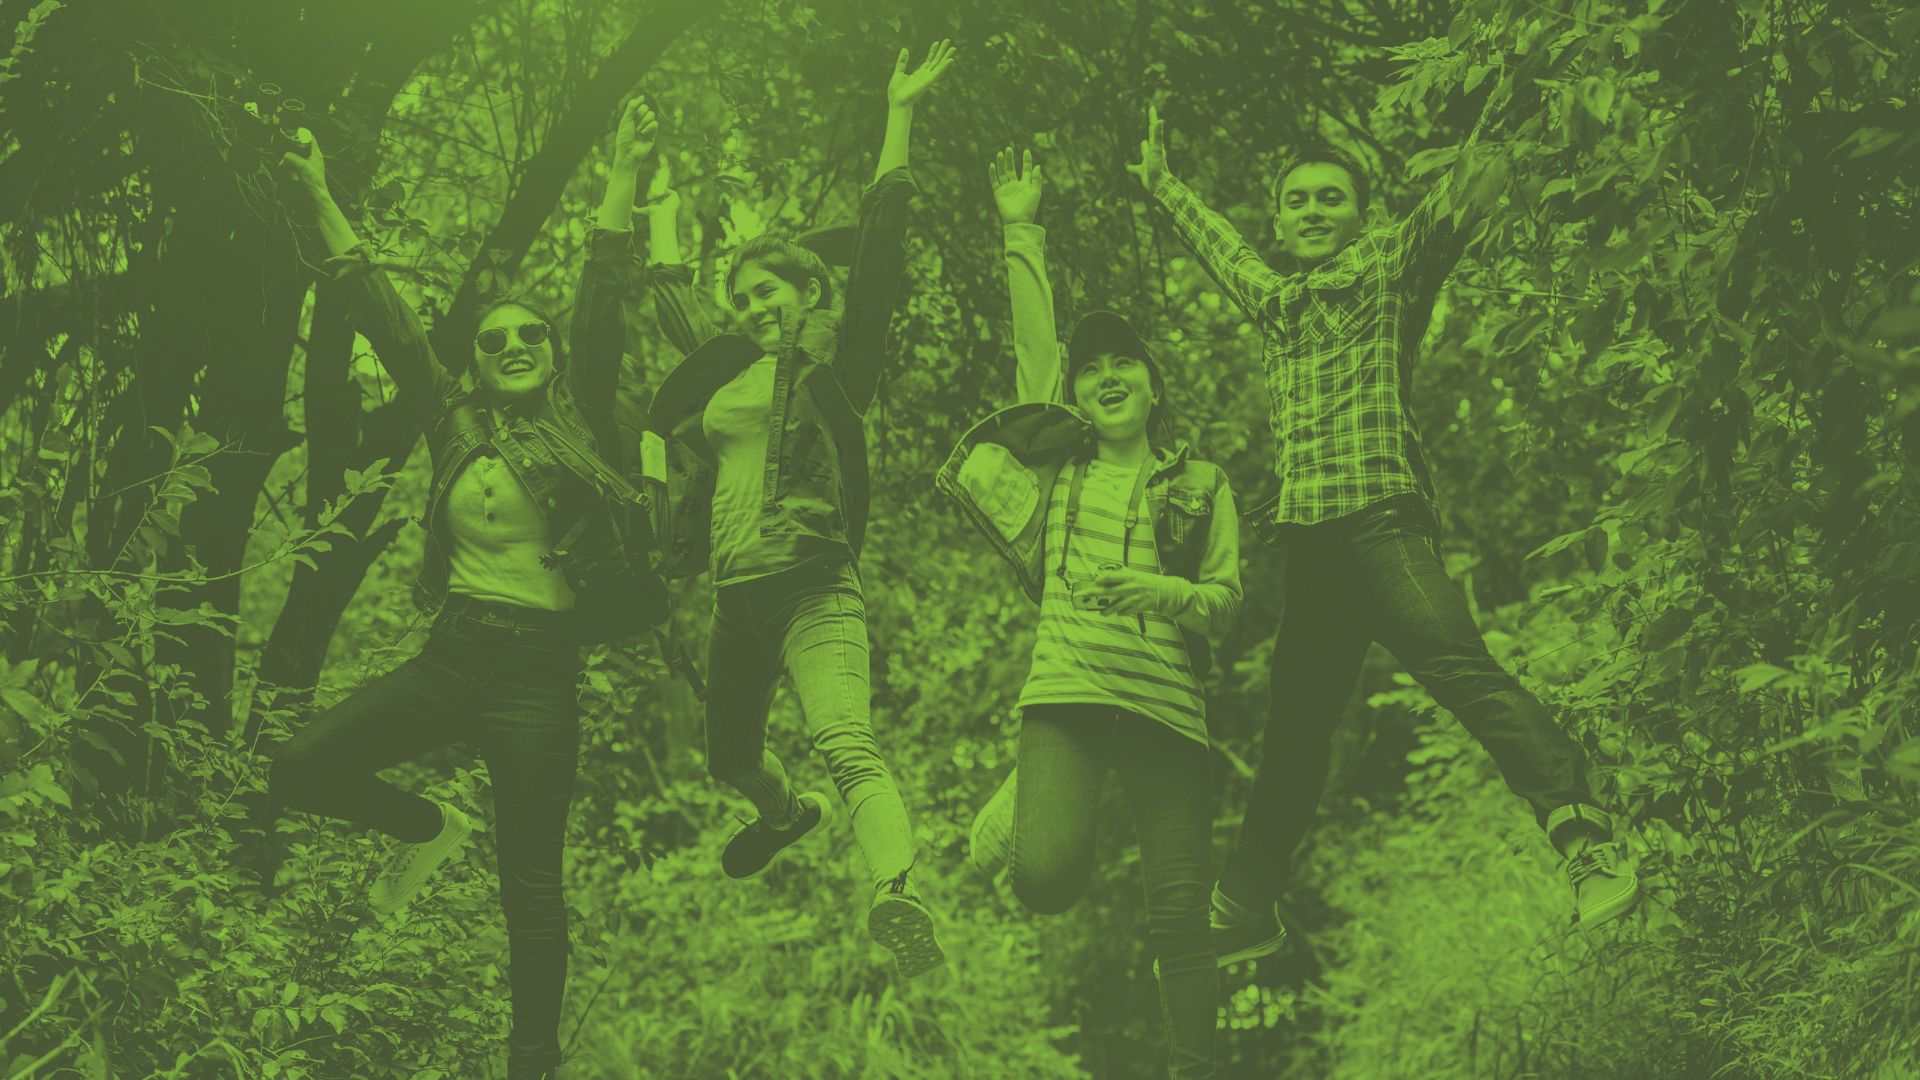 A photograph of young people jumping up with excitement in a wooded area - Opportunities for young people at Oval Learning schools to get funding for travel and adventures